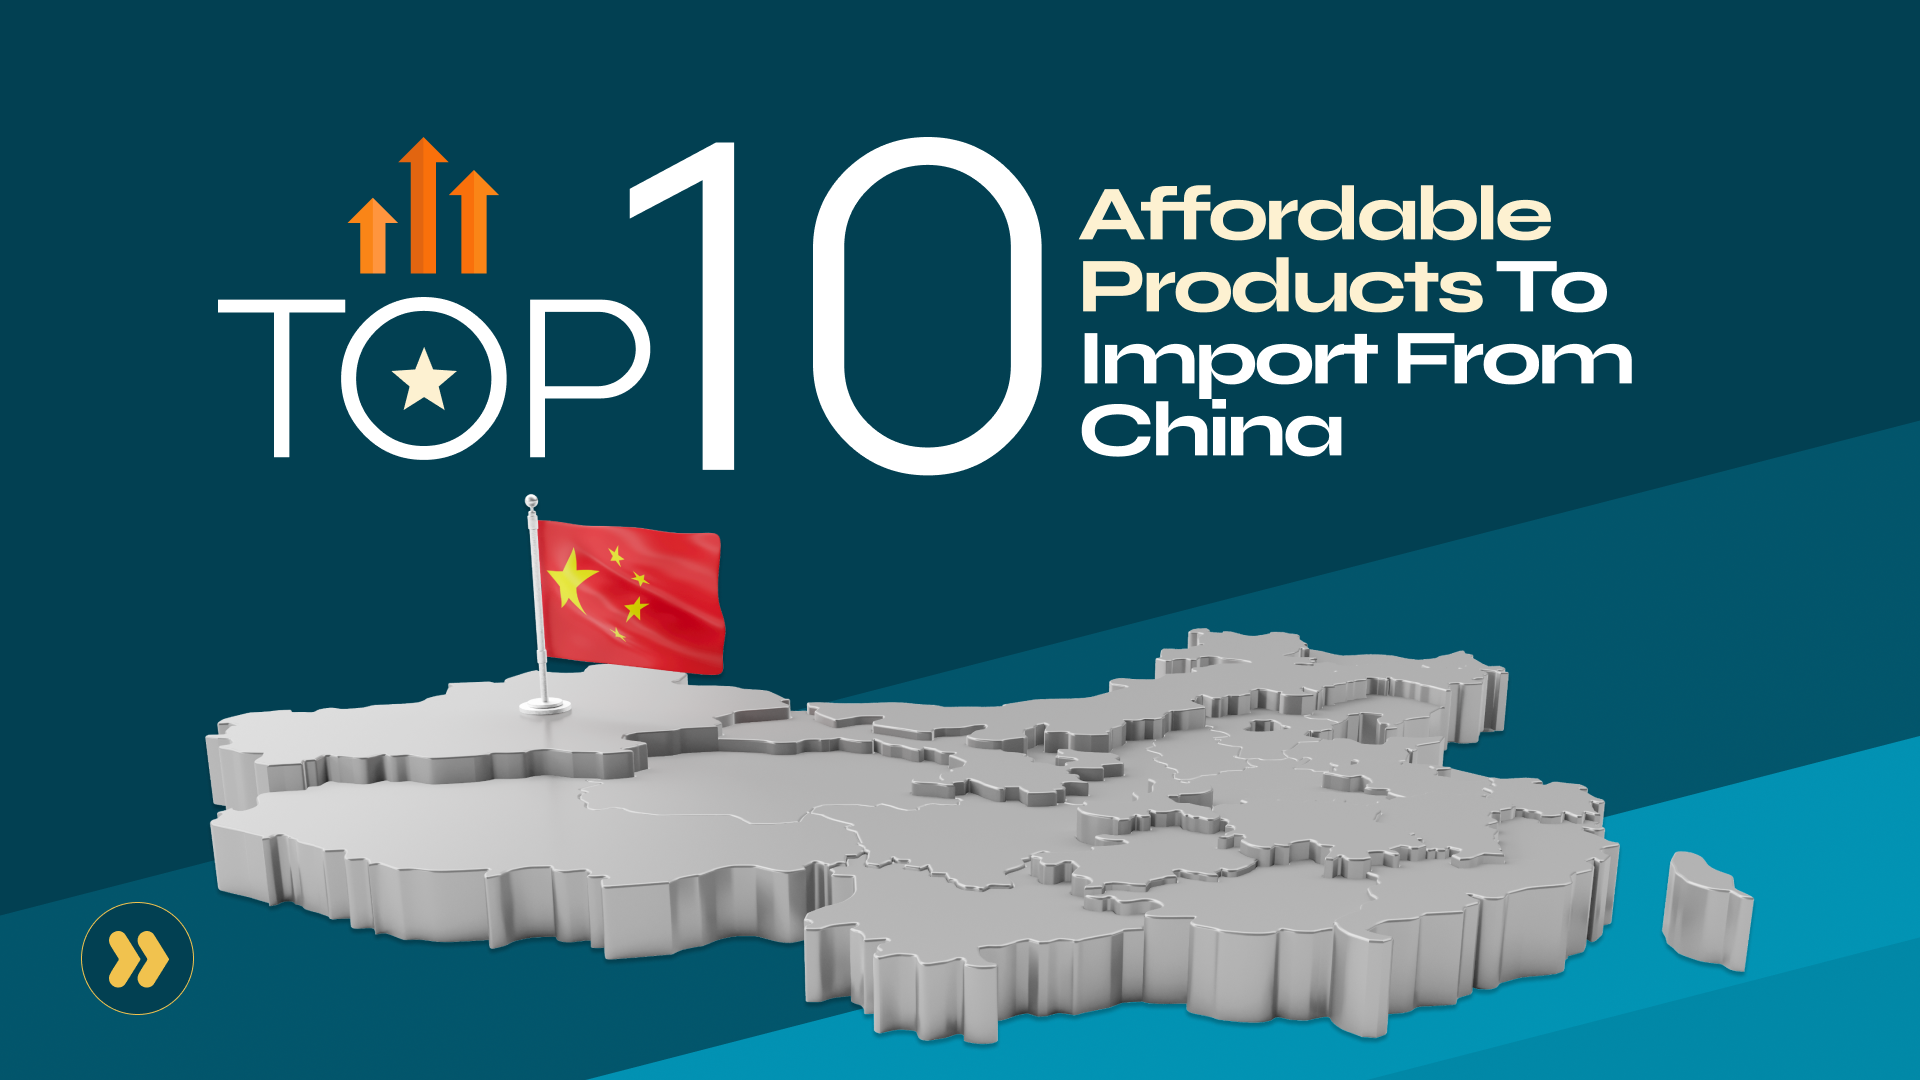 Top 10 Affordable Products To Import From China